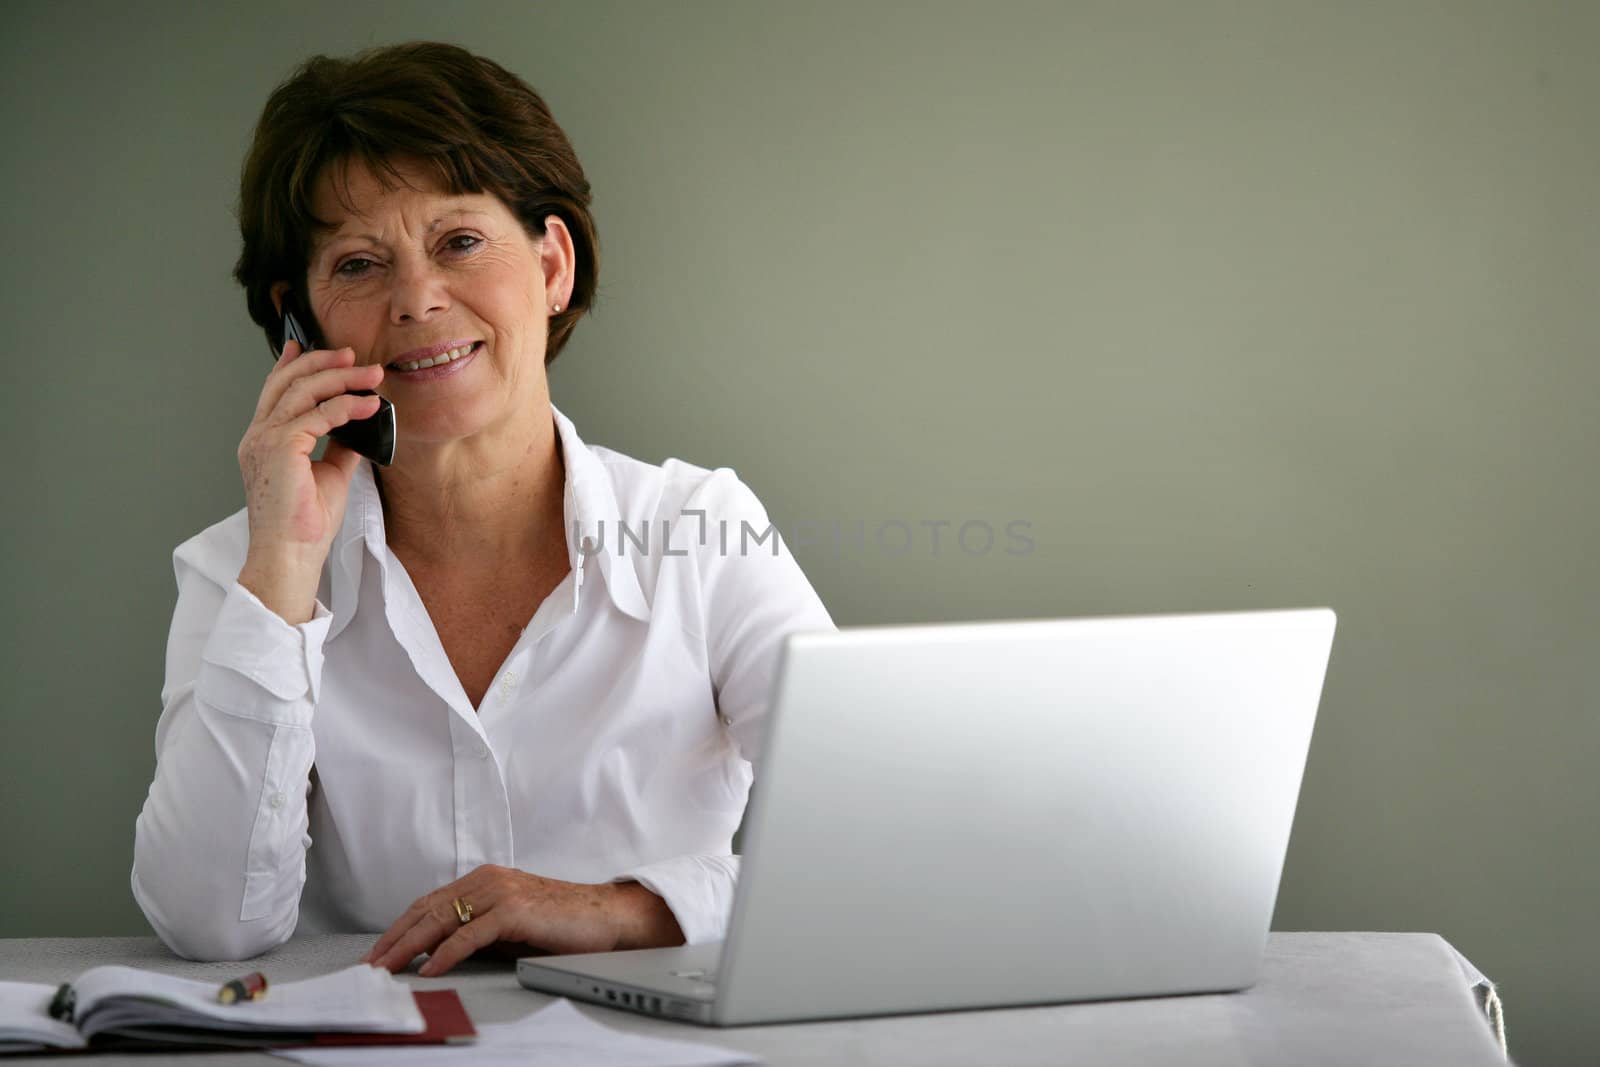 Middle-aged office worker at her desk